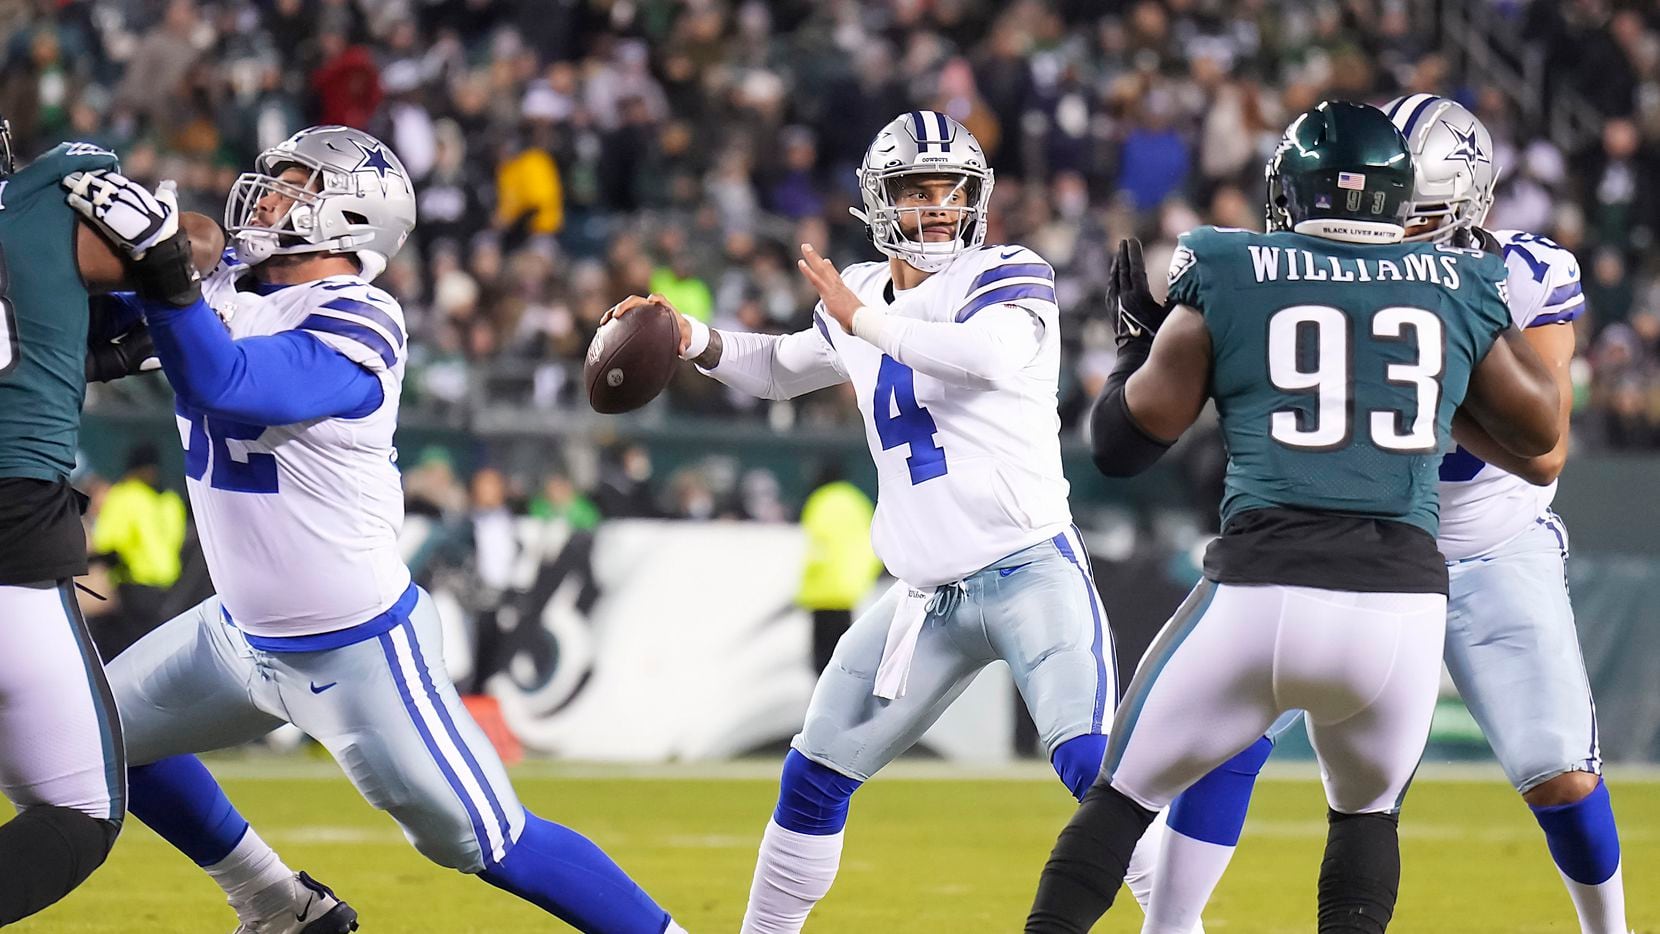 Dallas Cowboys quarterback Dak Prescott (4) throws a 14-yard touchdown pass with protection from guard Connor Williams (52) and offensive tackle Terence Steele (78 during the first quarter of an NFL football game against the Philadelphia Eagles at Lincoln Financial Field on Saturday, Jan. 8, 2022.